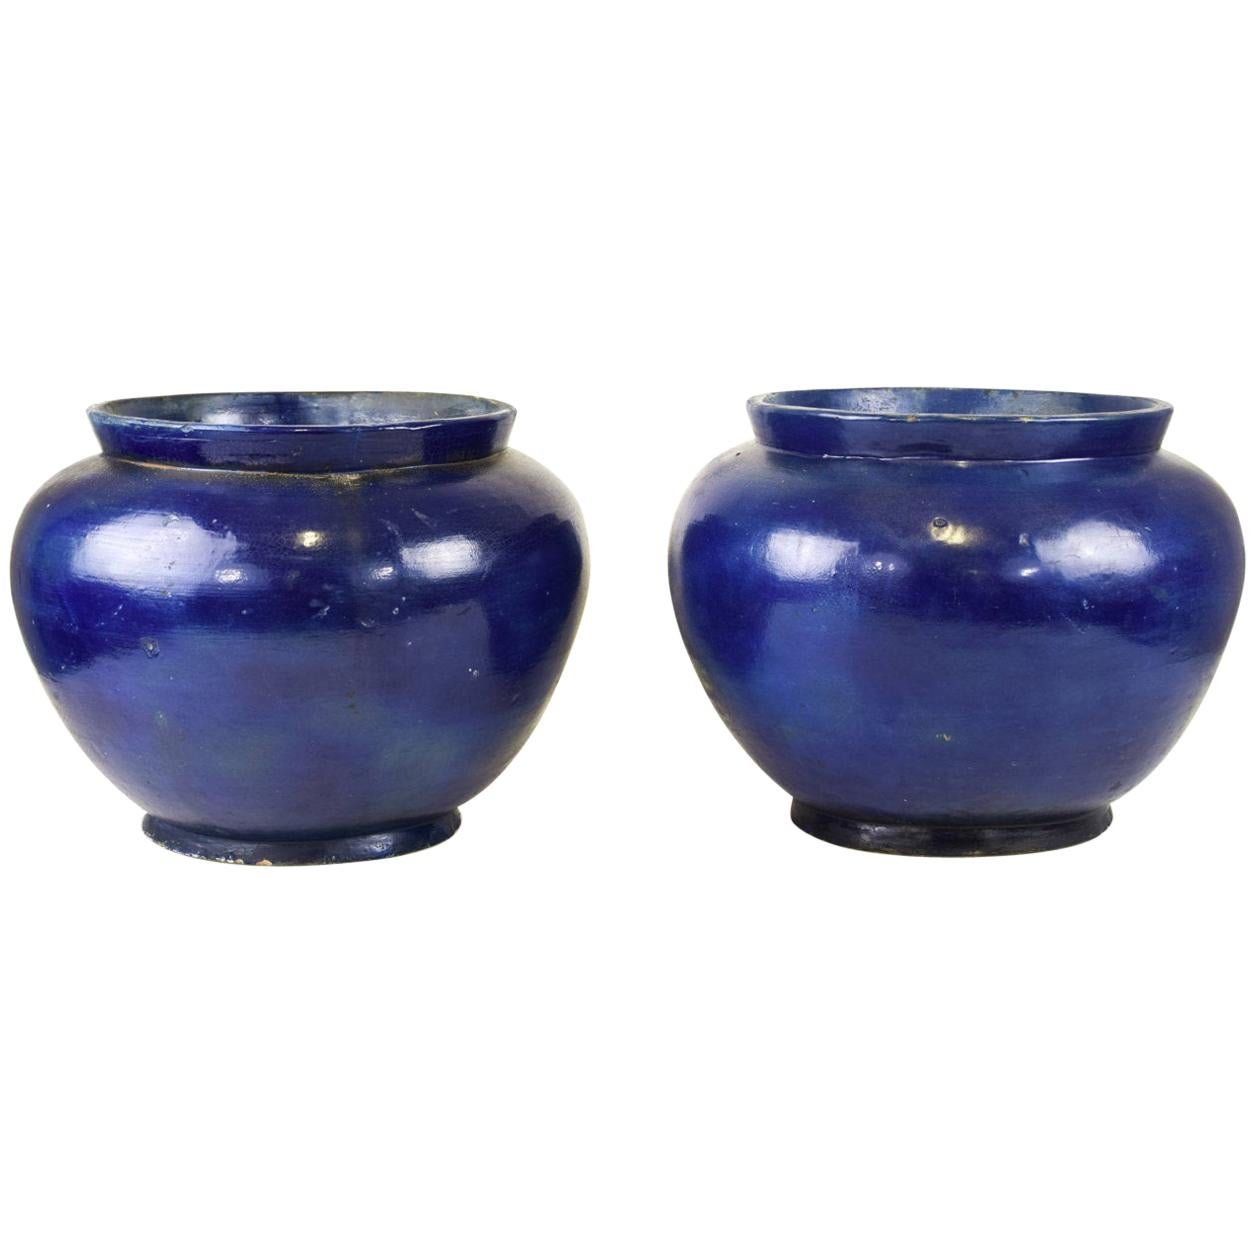 Pair of Ancient Blue Terracotta Vases, by Oriental Manufacture, 19th Century For Sale